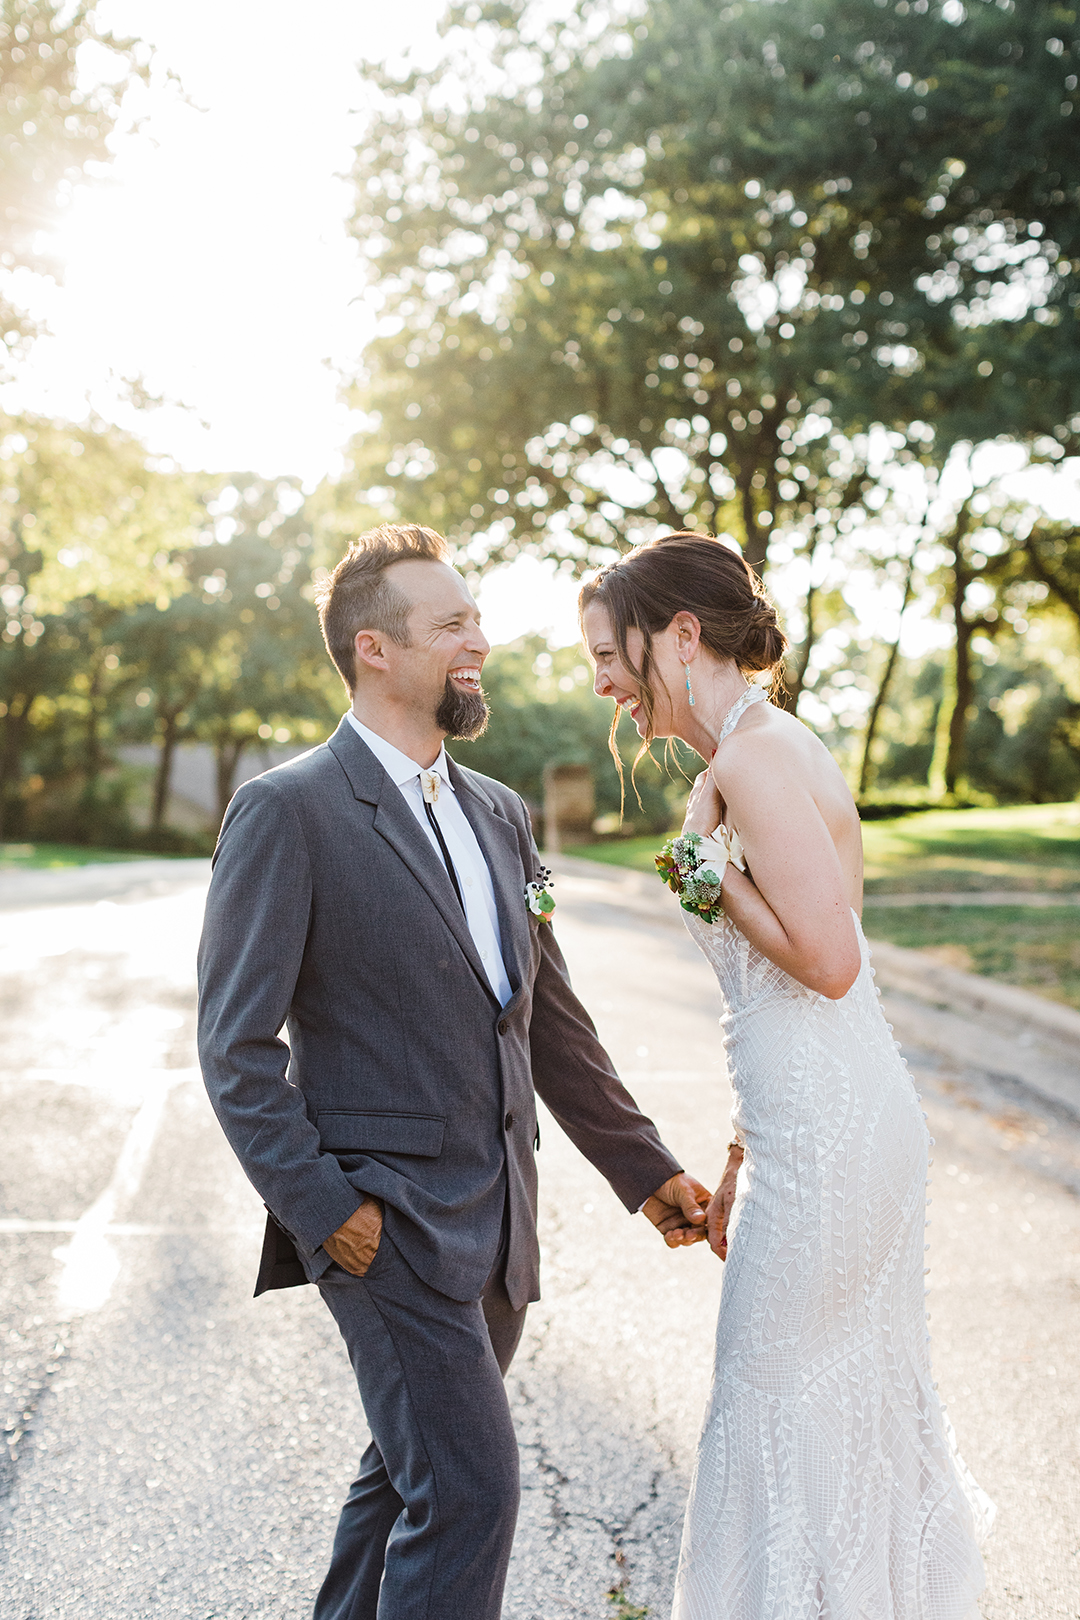 groom on left side and bride on right side holding hands, laughing together, with golden hour sunlight behind them